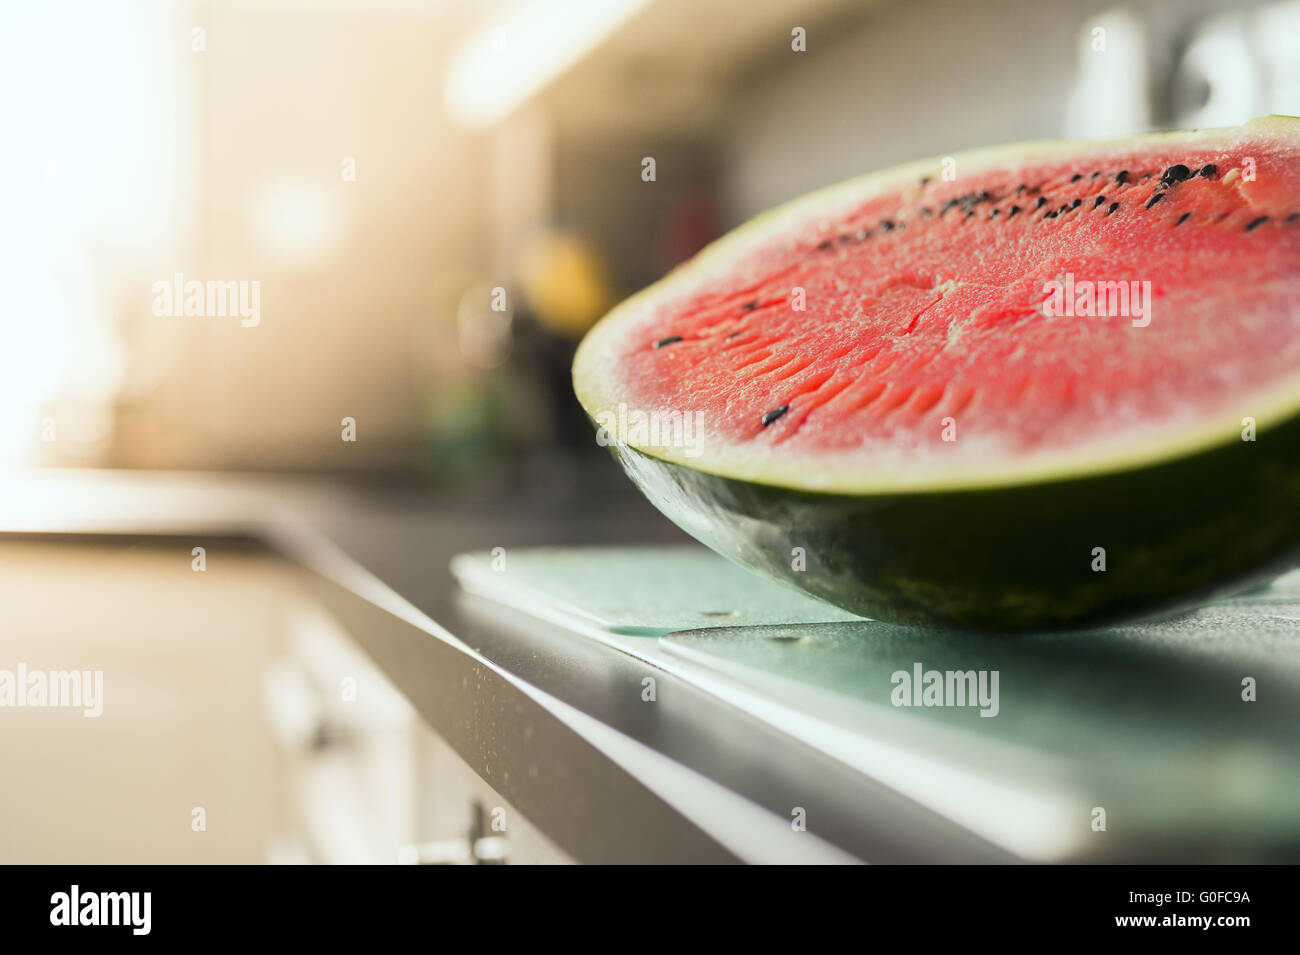 A freshly cut melon half is on the countertop in the kitchen. Stock Photo